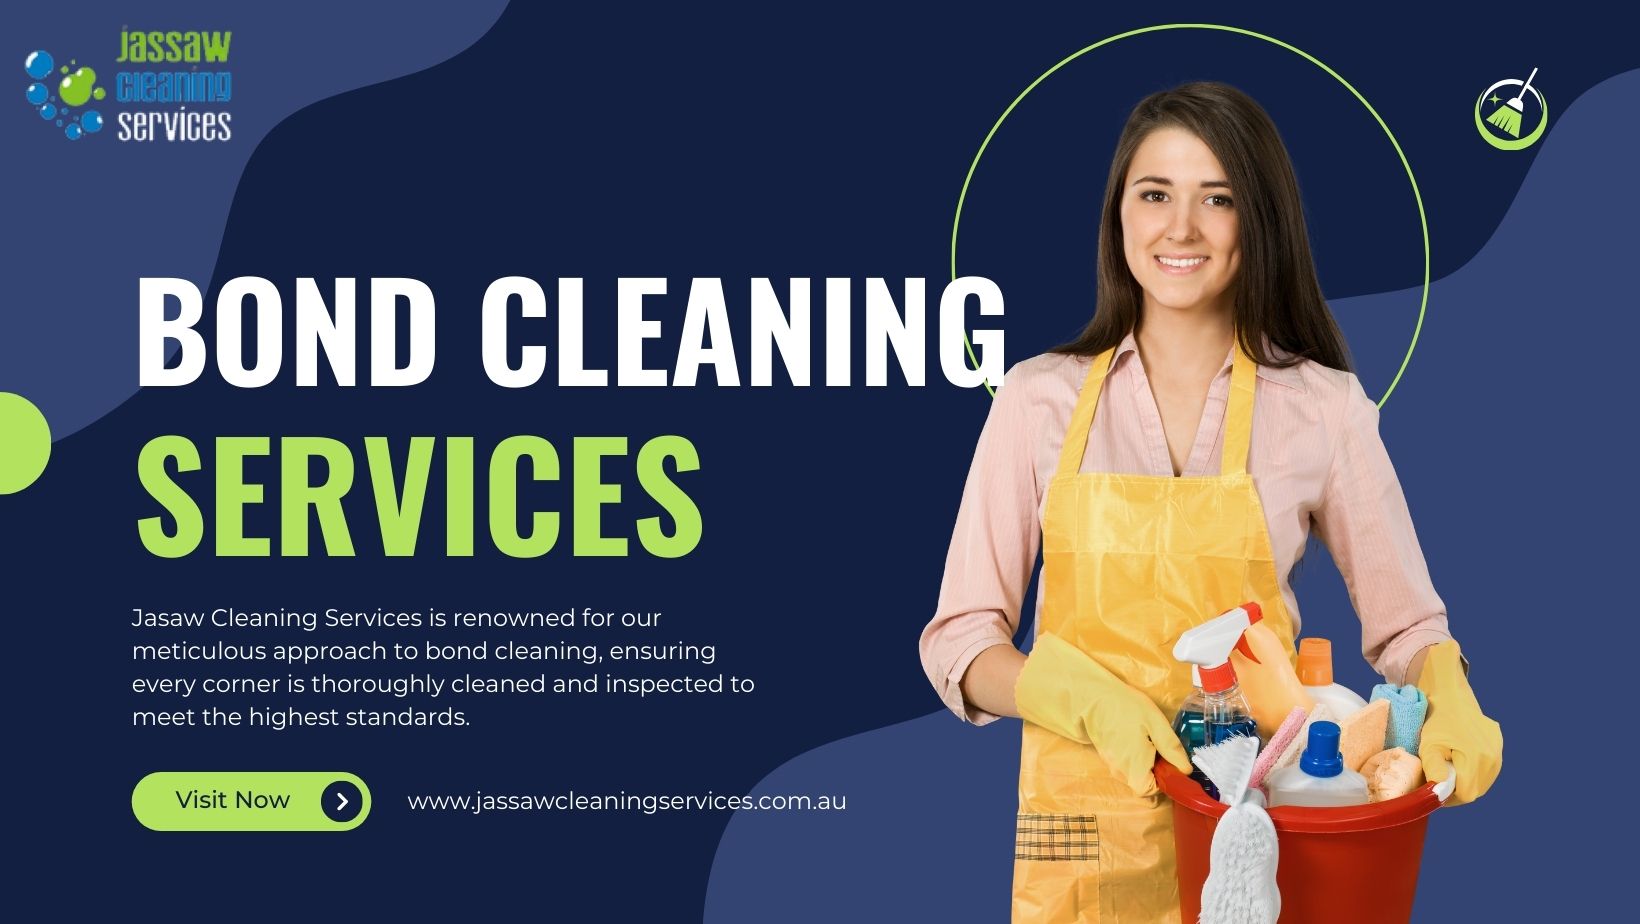  Premium Bond Cleaning Services Available in Canberra and Queanbeyan